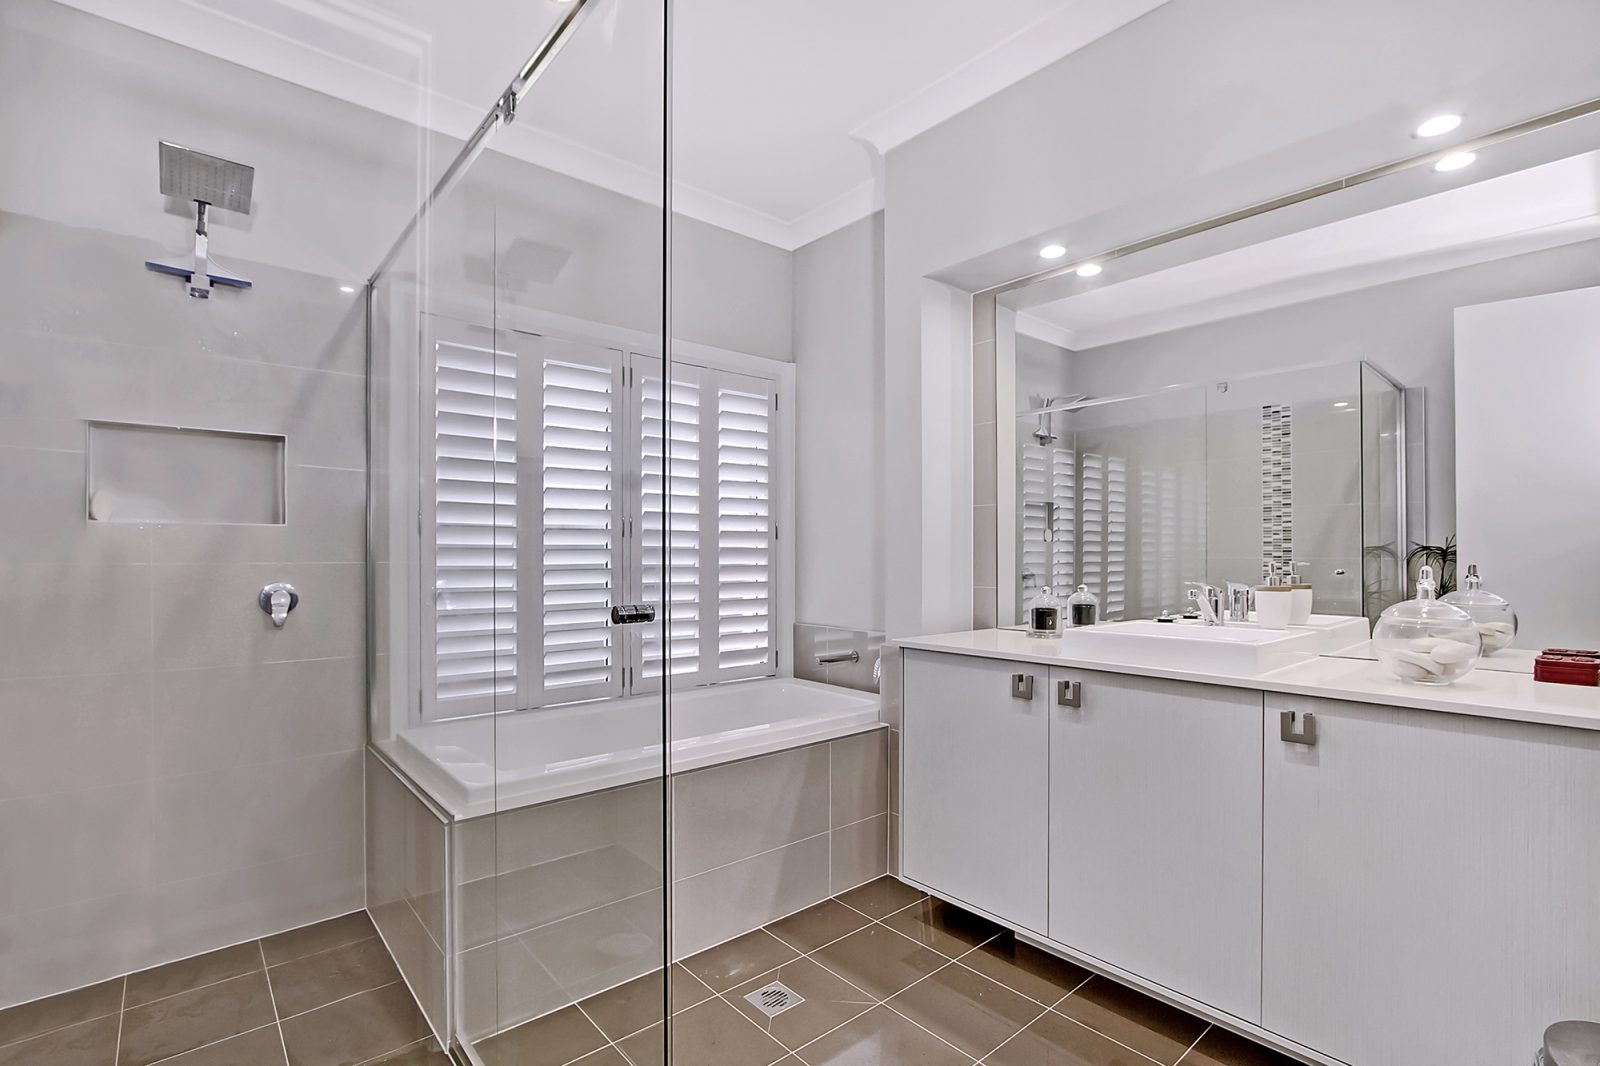 Plantation shutters for bathrooms